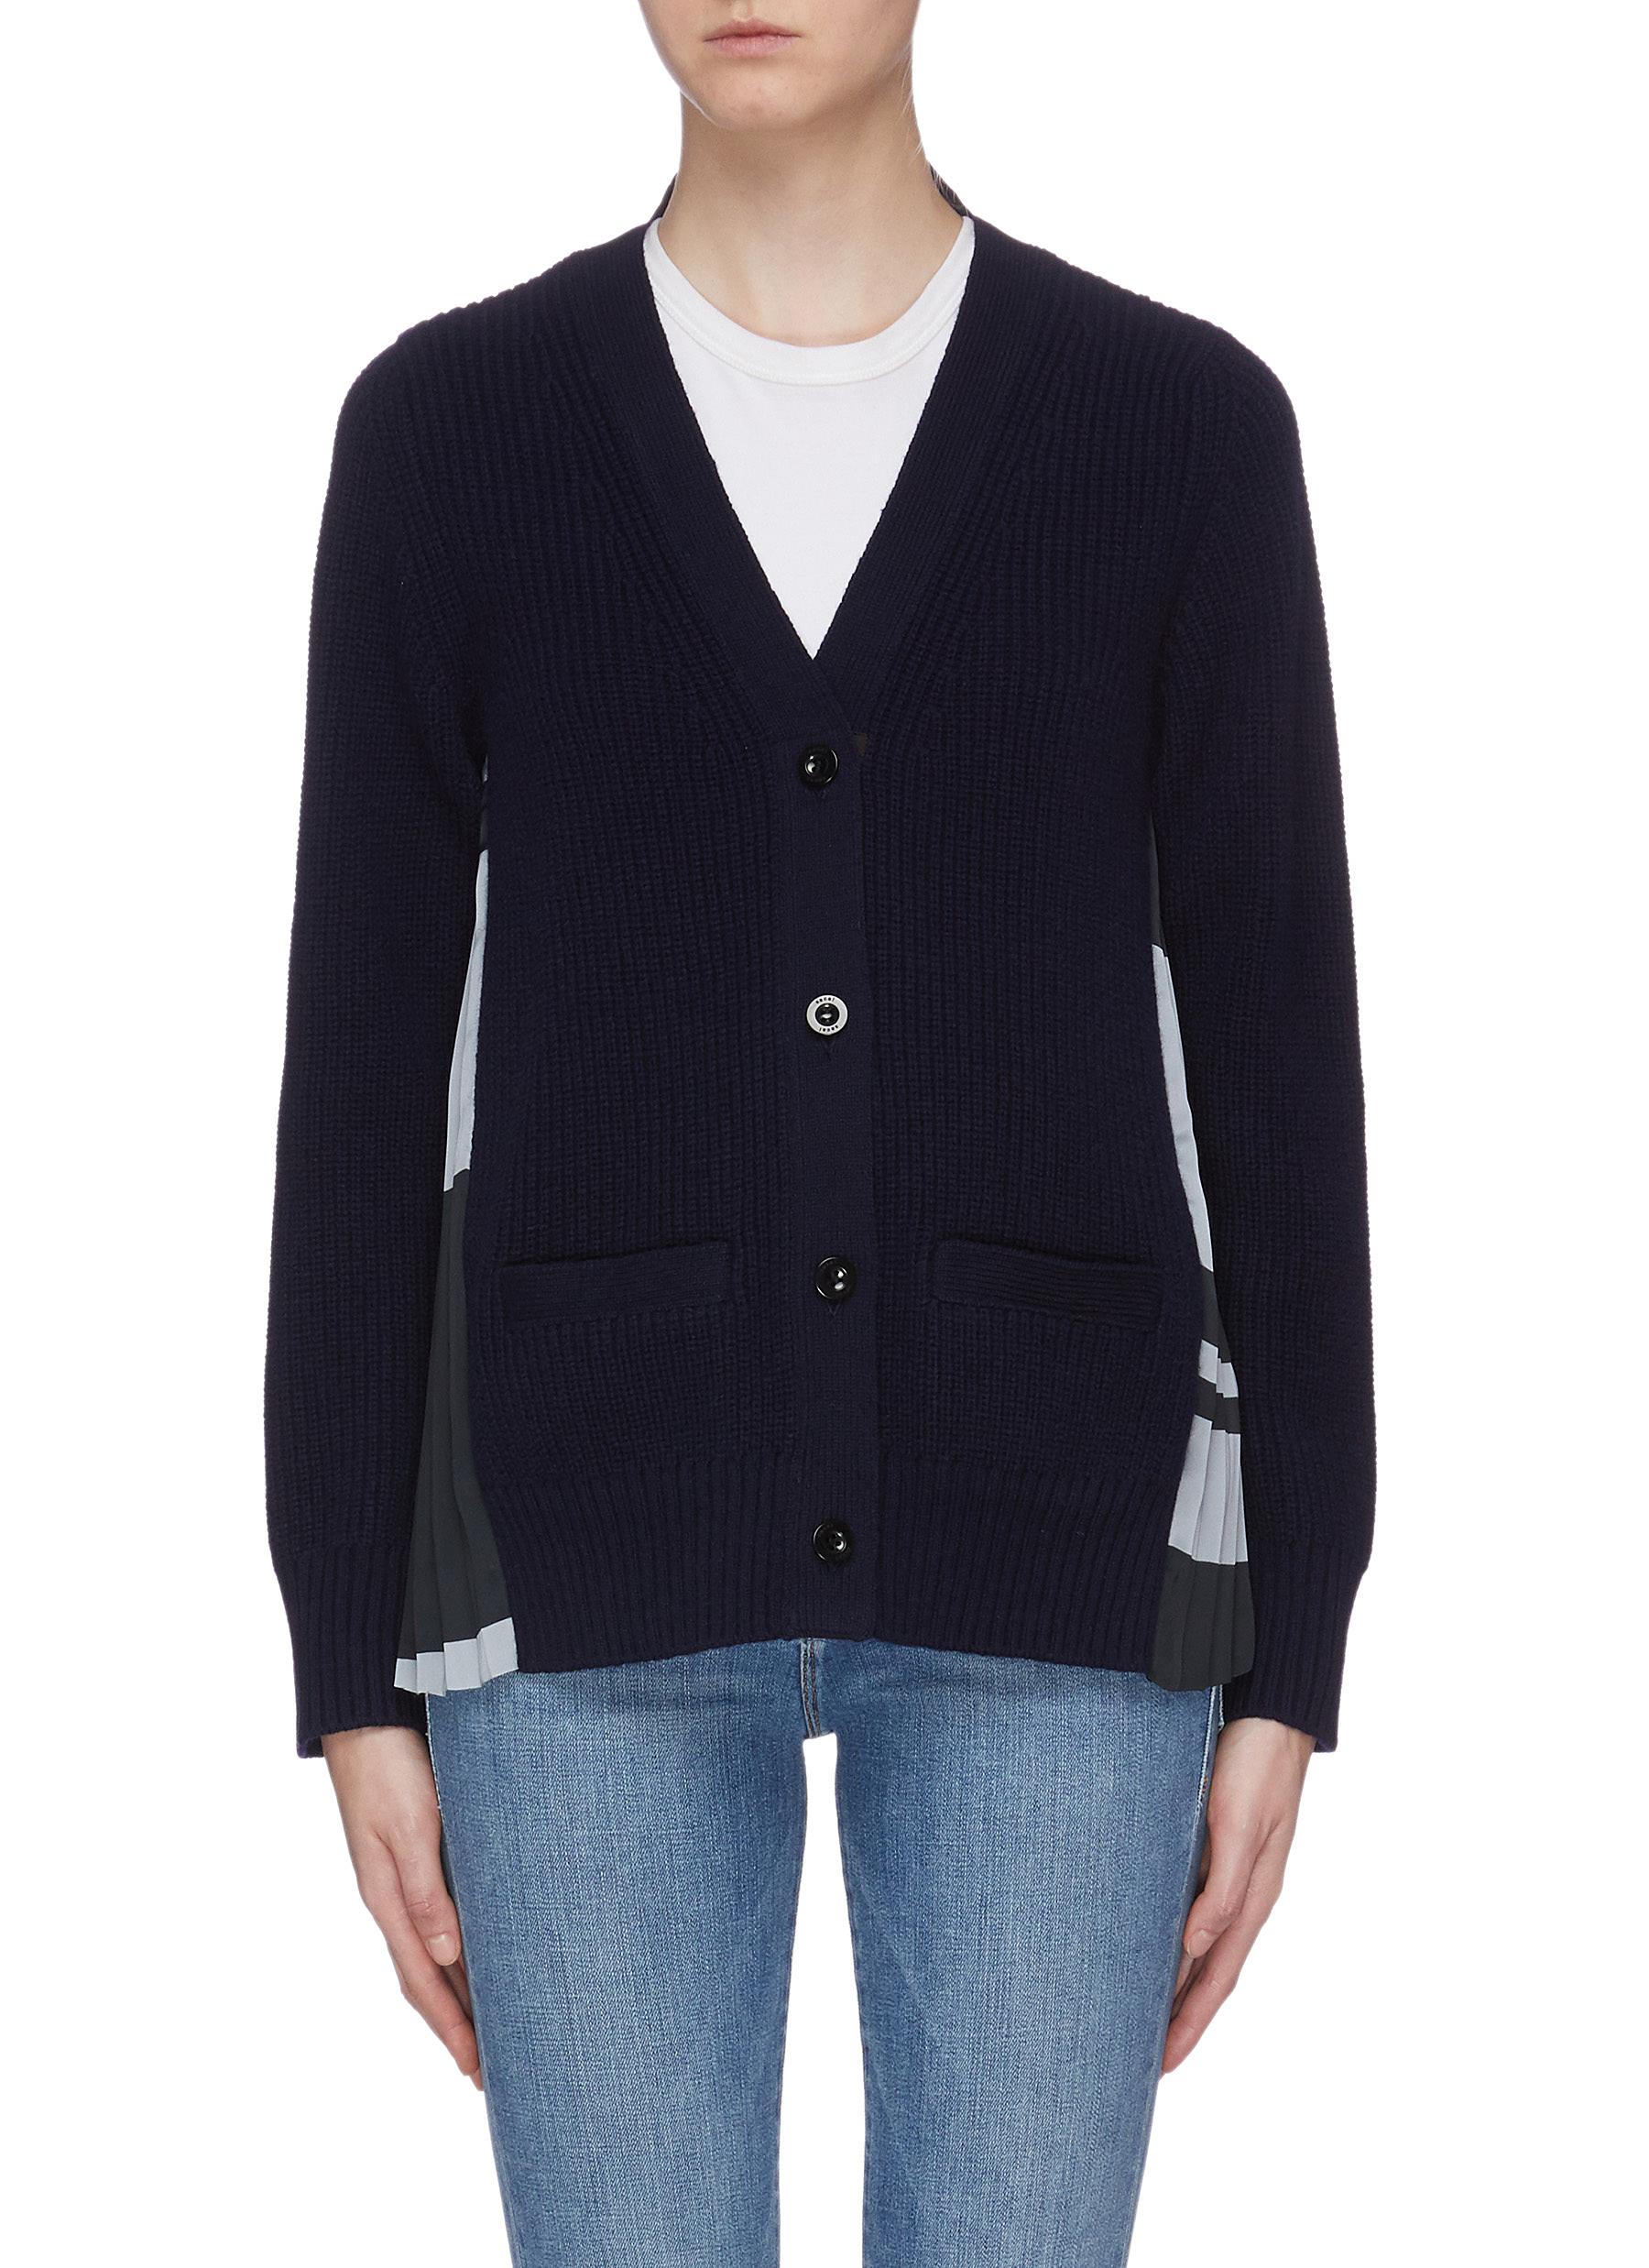 Photo of Sacai Clothing Knitwear online sale